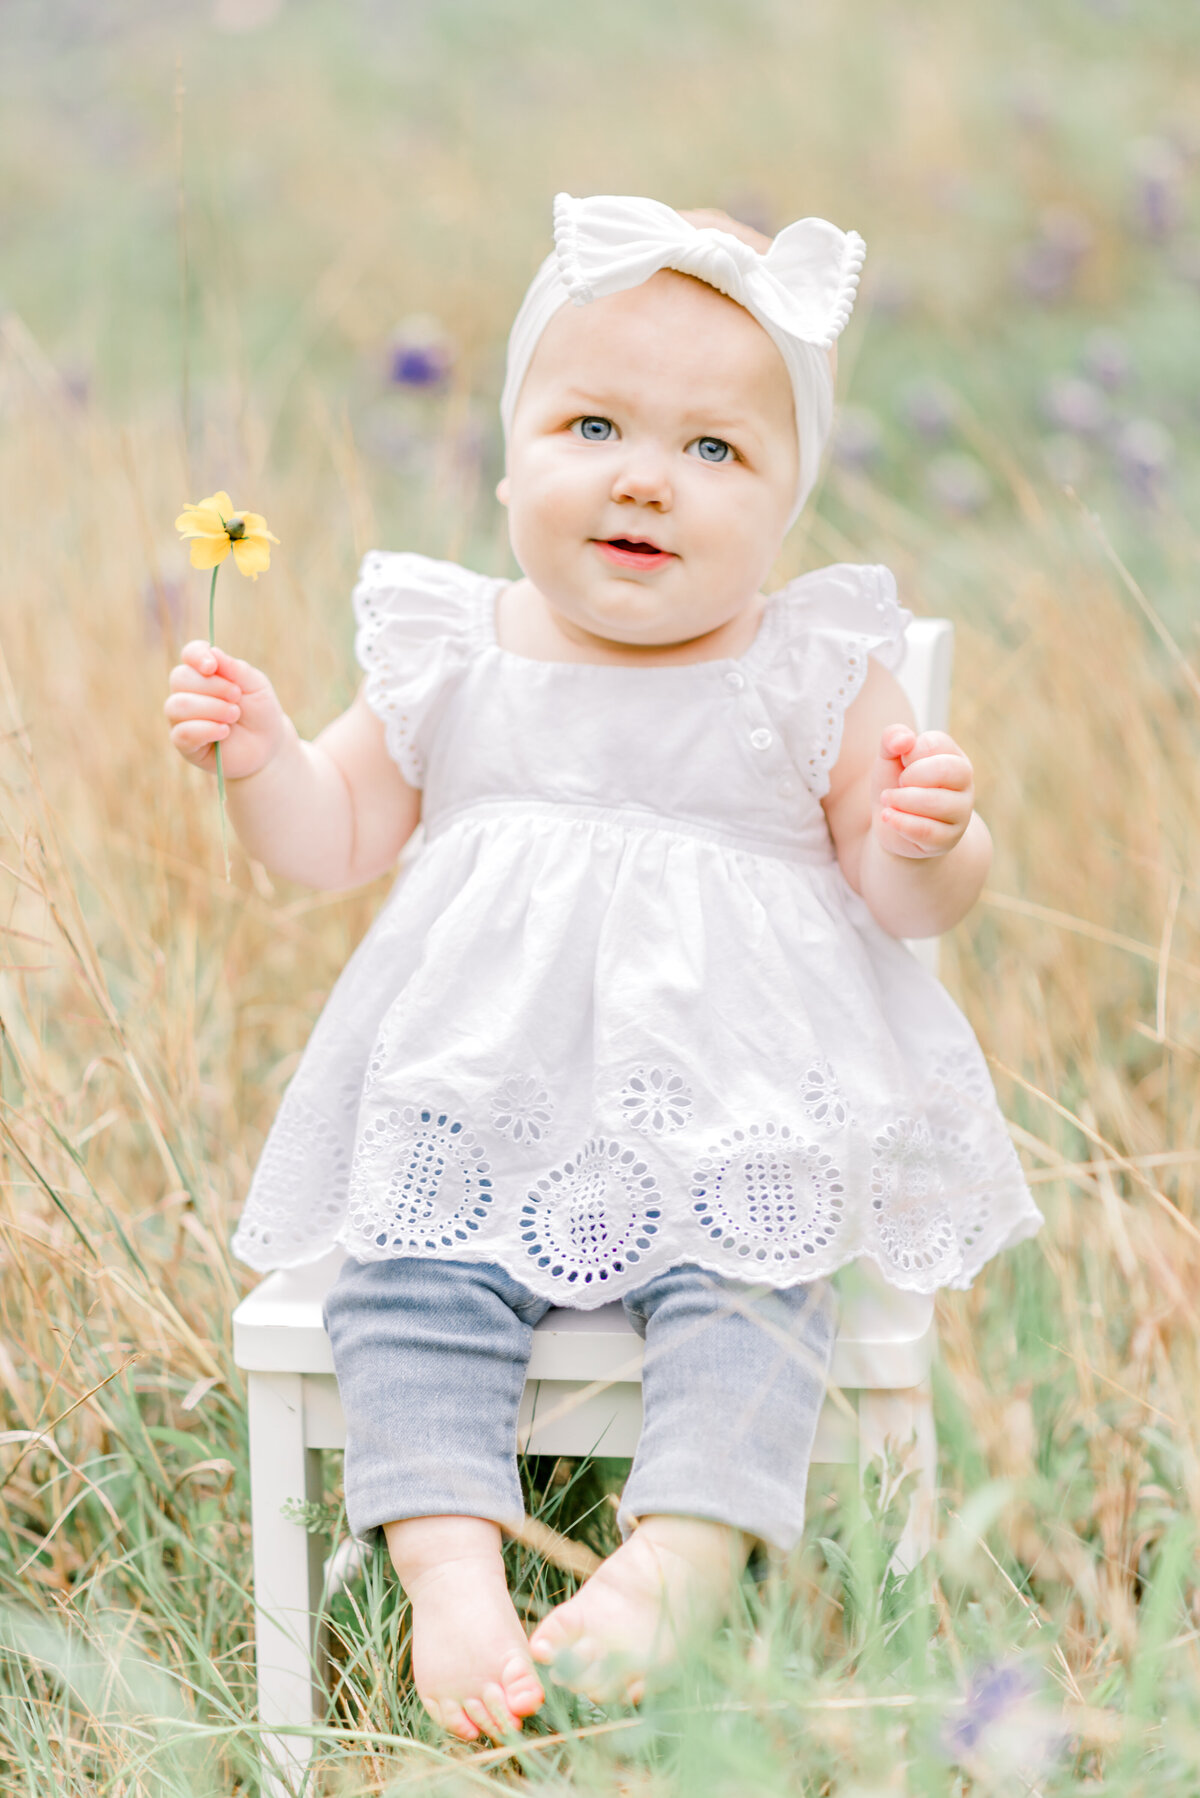 Baby girl sitting on a chair in Texas wildflowers holding a flower and looking at camera